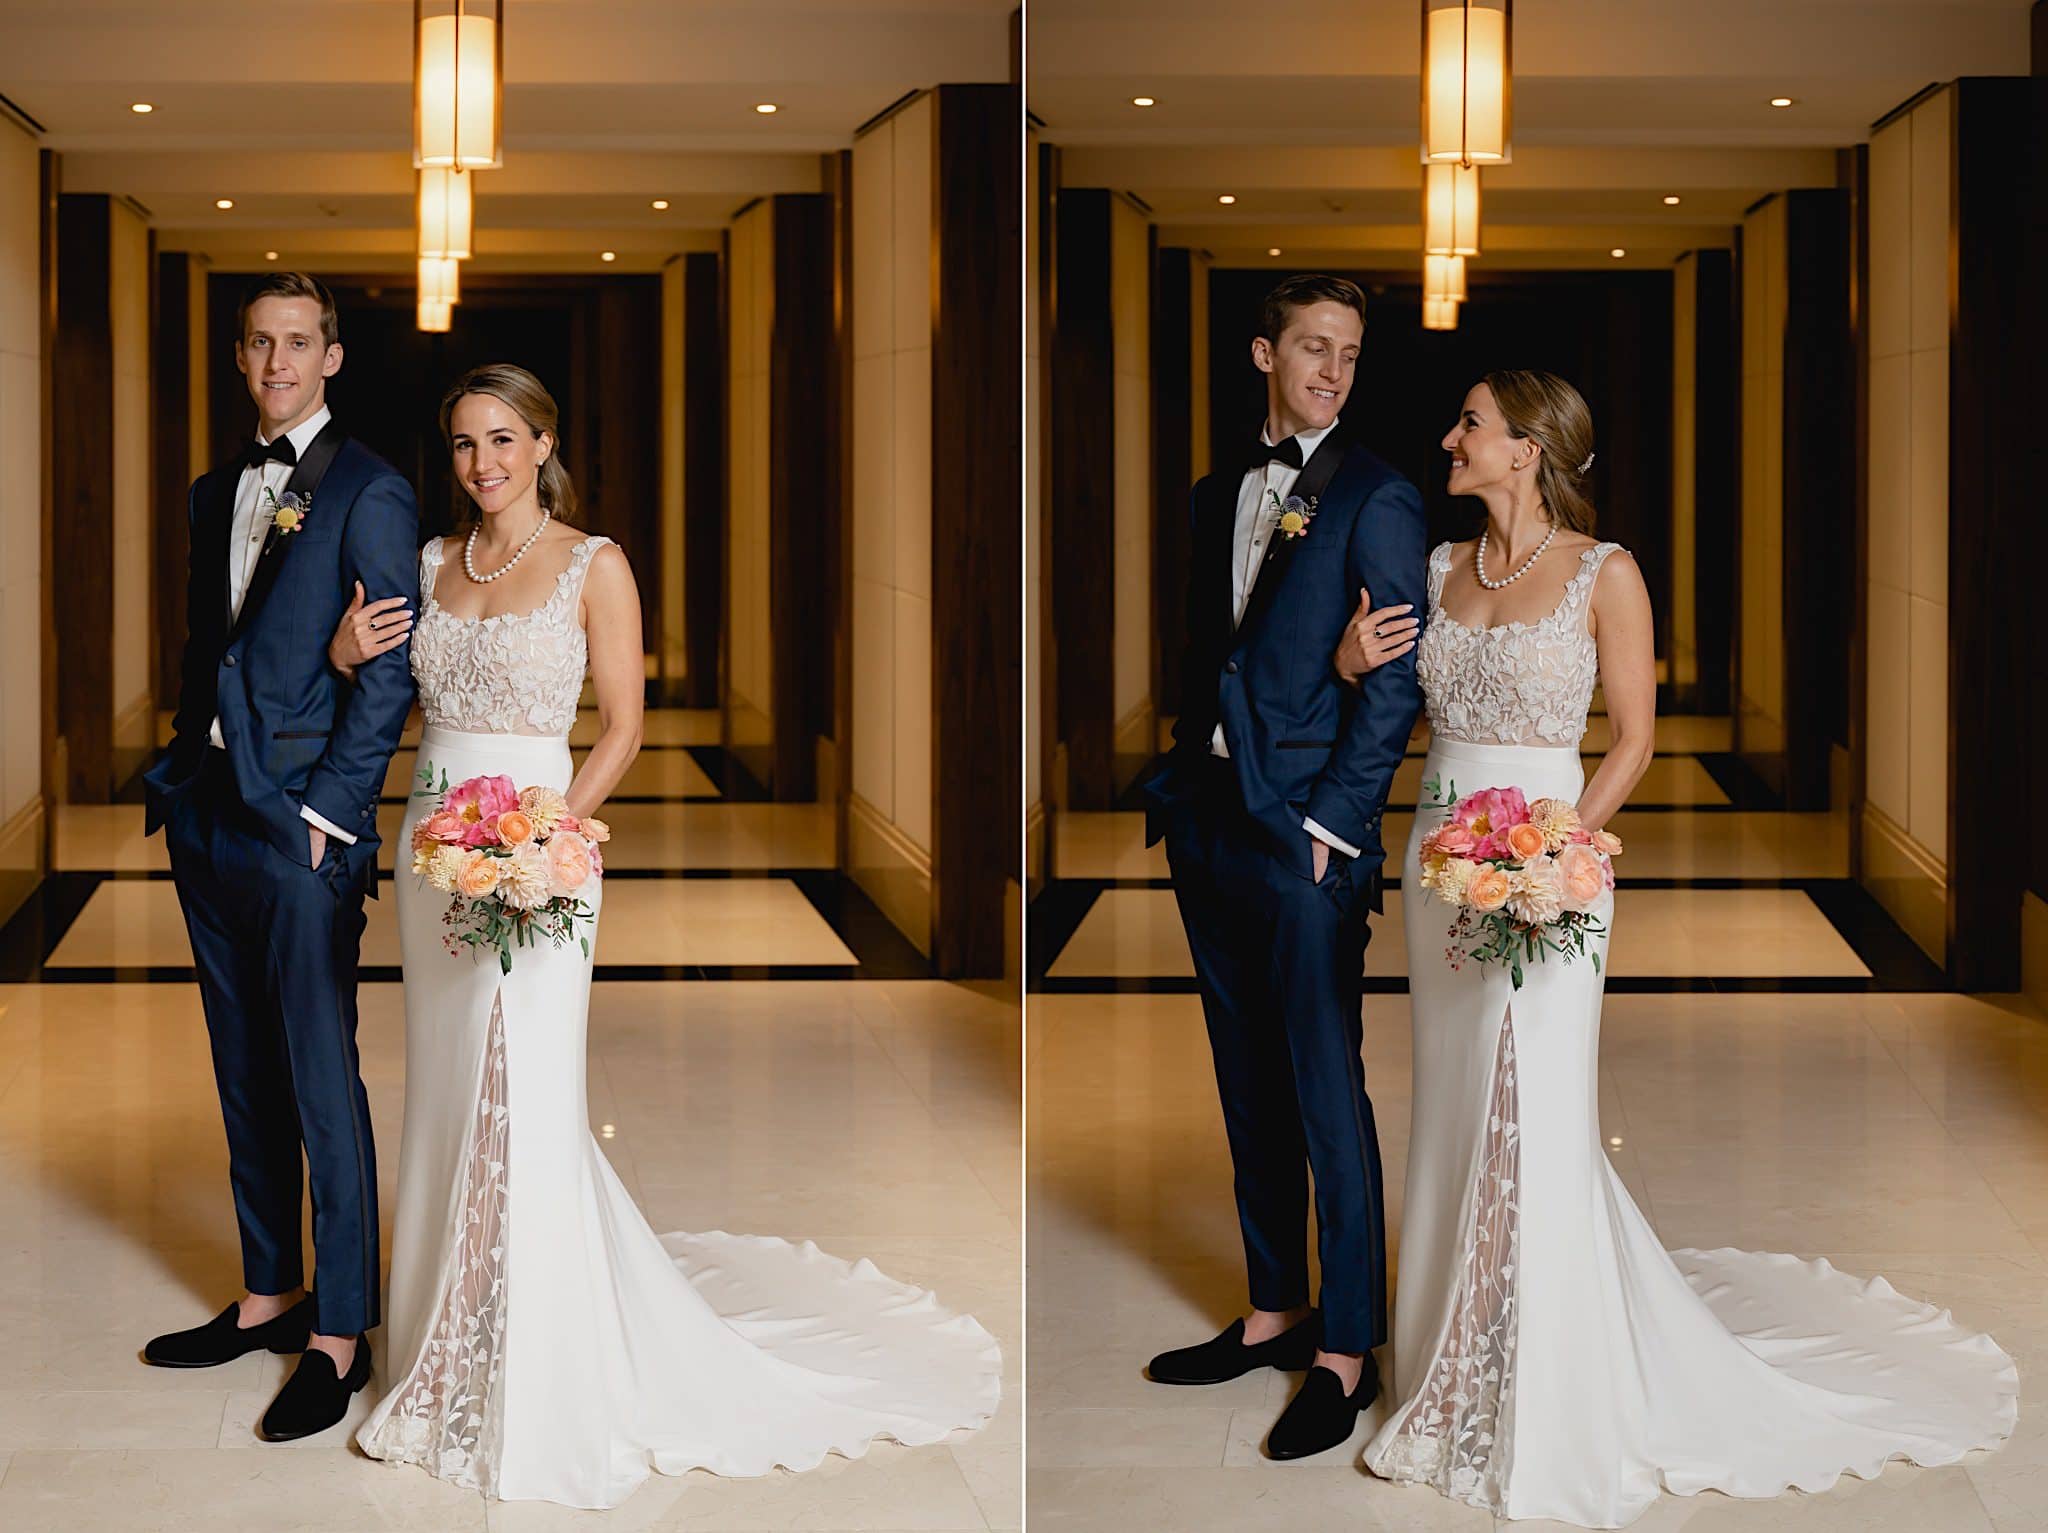 stunning wedding photography at the Langham Chicago